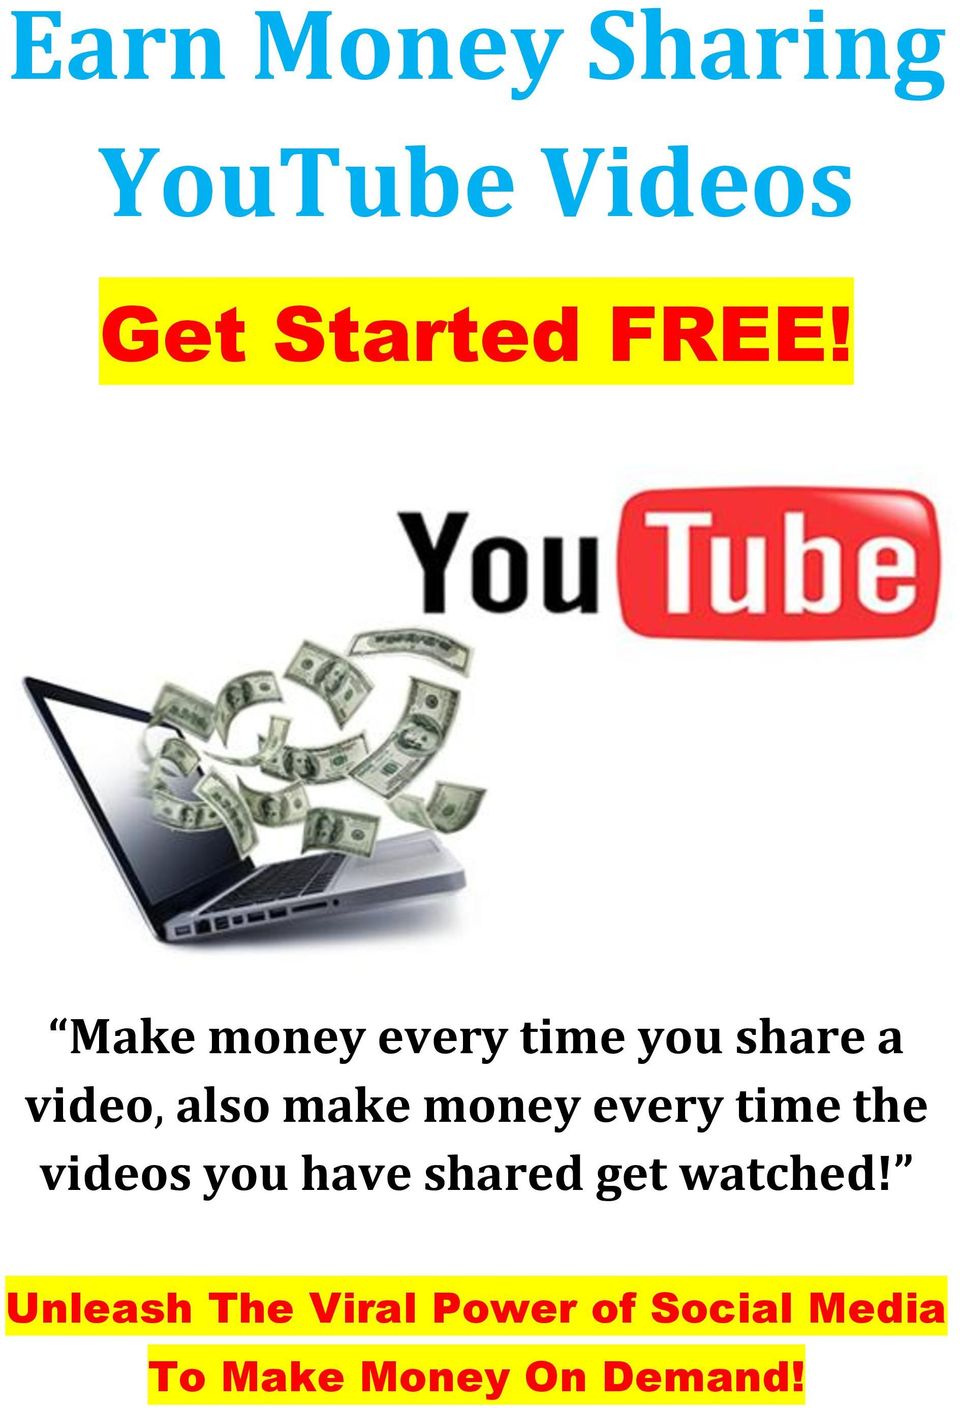 money every time the videos you have shared get watched!